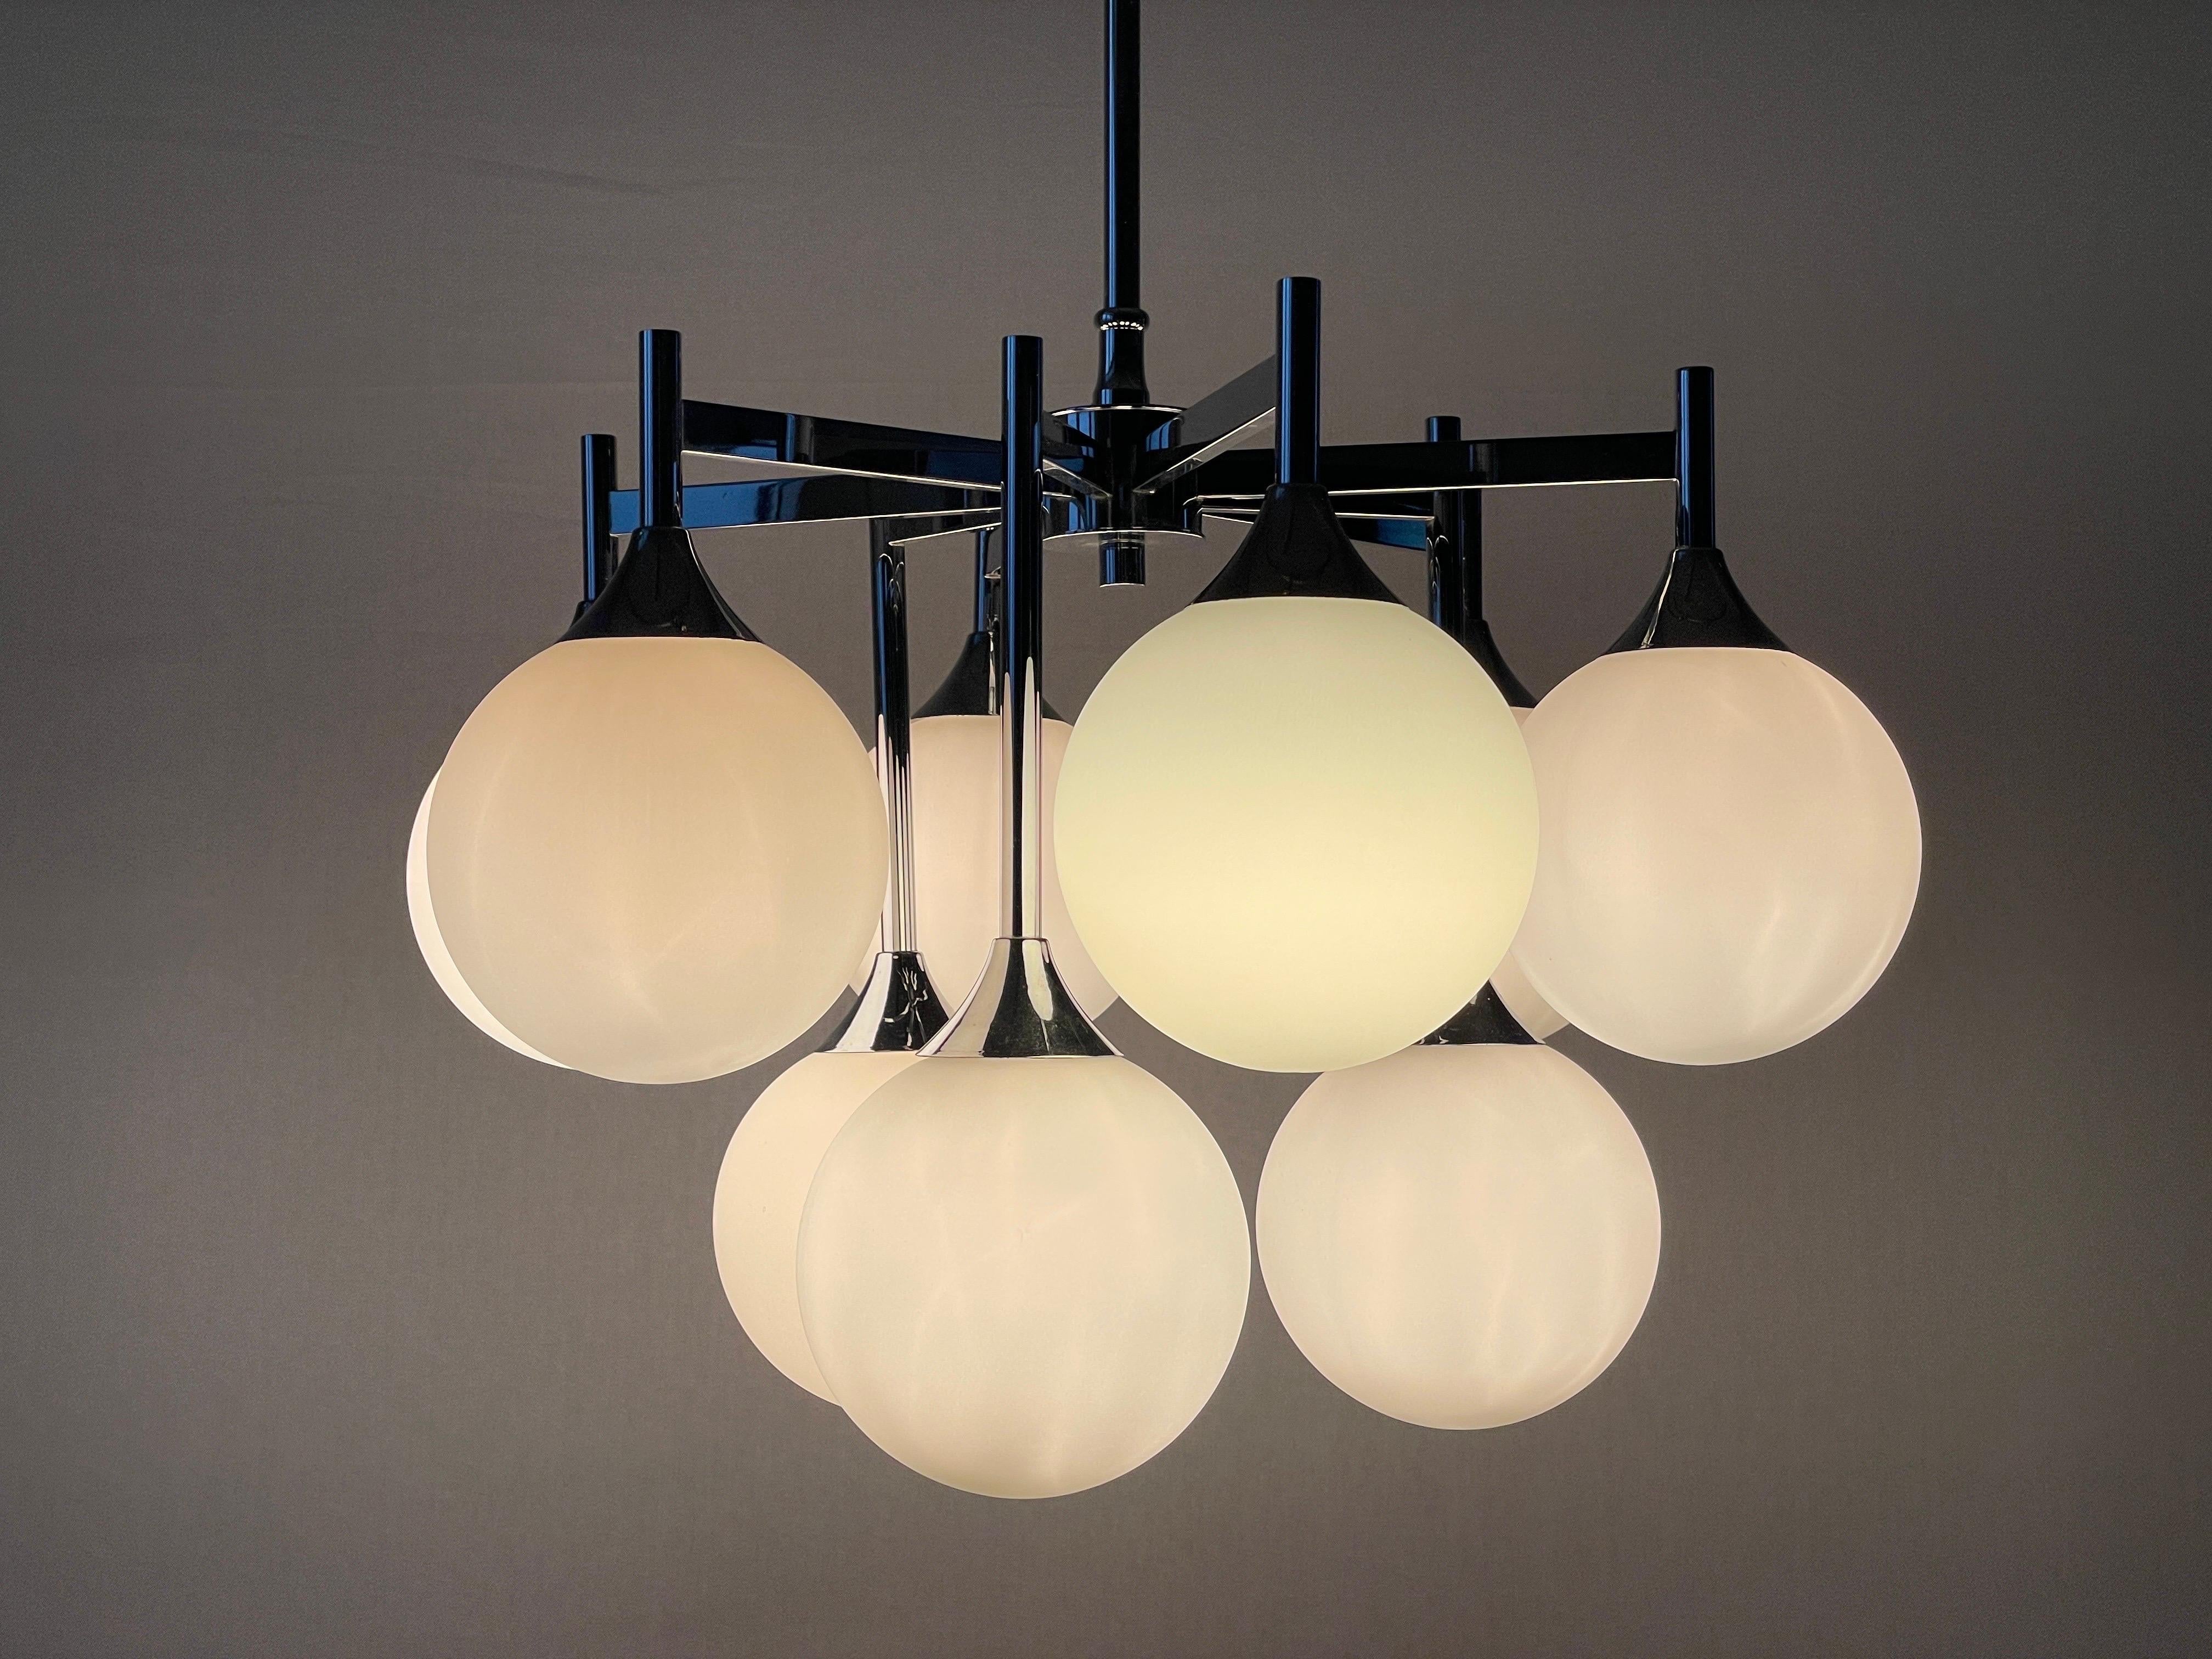 9 White Ball Glass and Chrome Body Chandelier by Kaiser Leuchten, 1960s, Germany For Sale 5